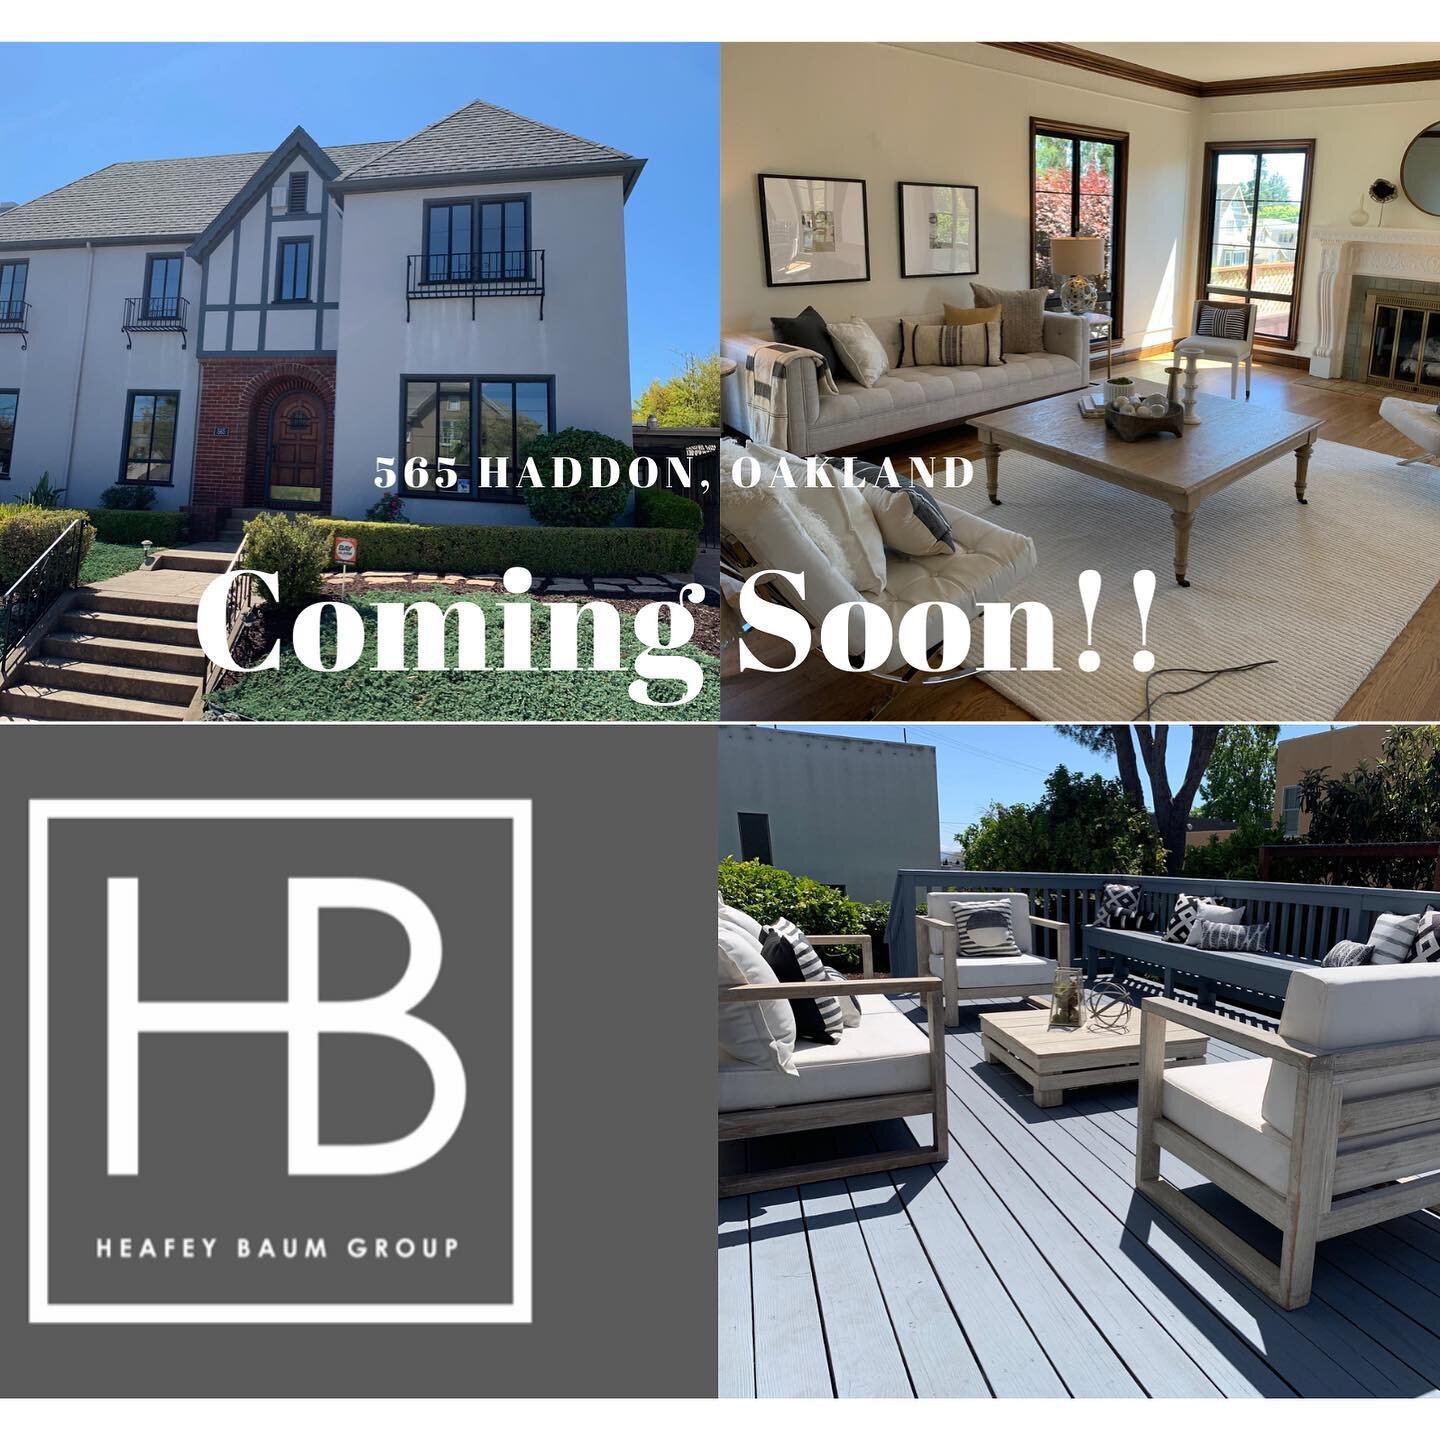 After many, many decades this amazing family home will be on the market very soon!!
.
.
.
#comingsoon #oaklandrealestate #compassrealestate #heafeybaumgroup